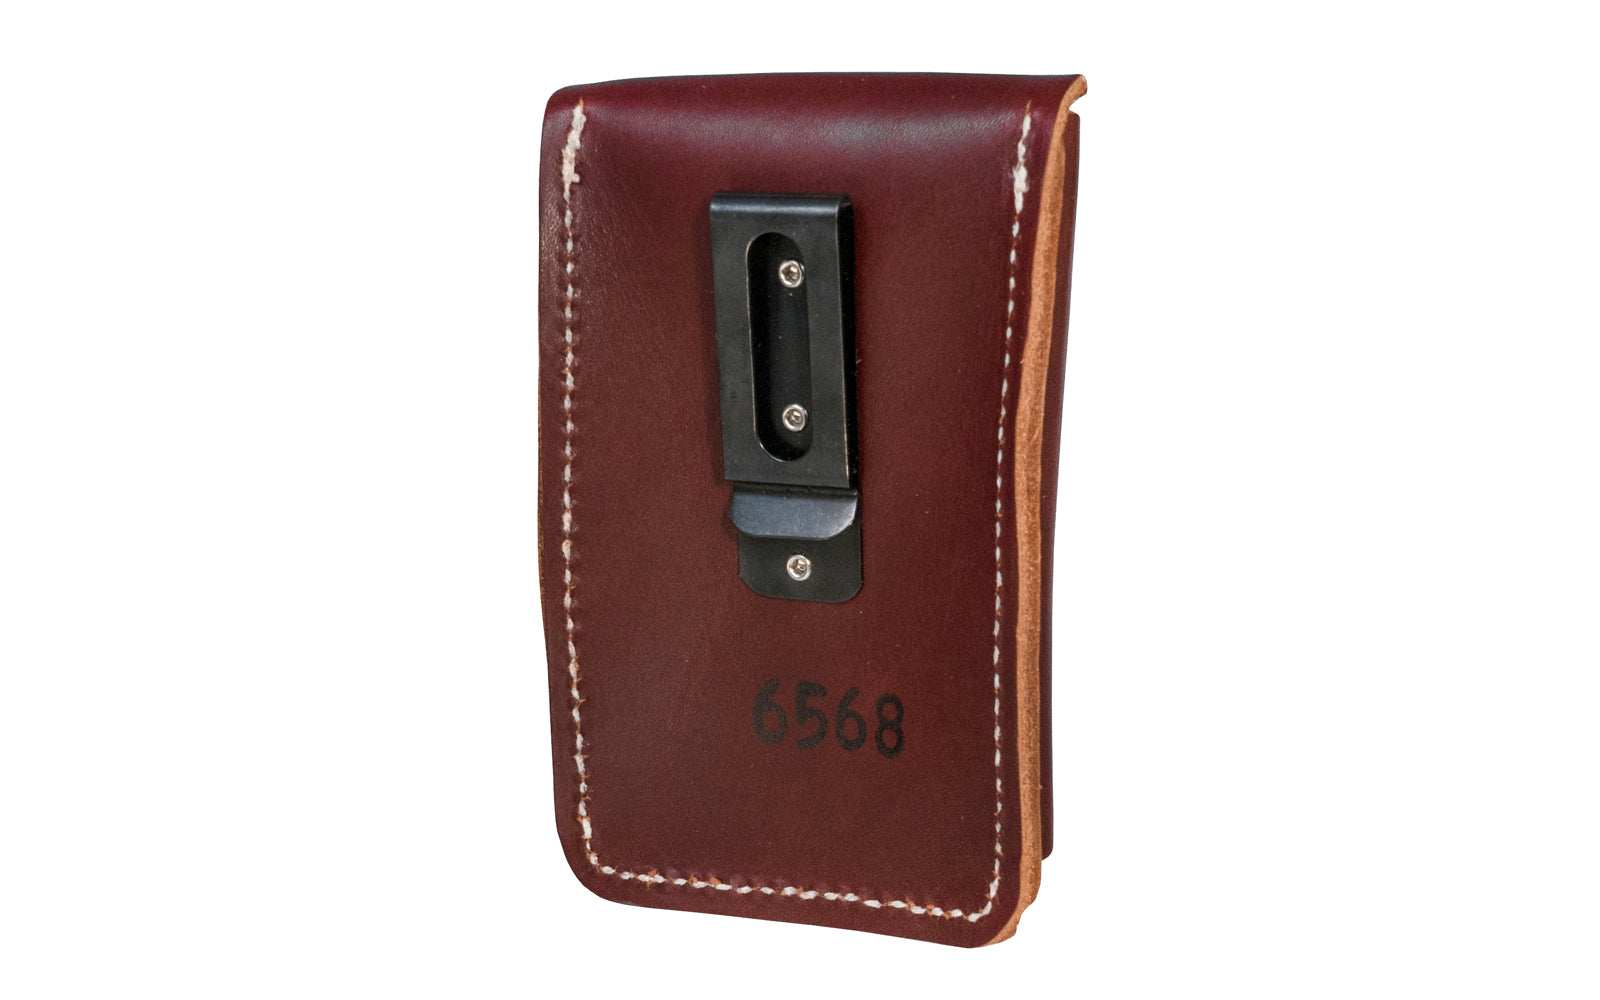 Occidental Leather Clip-On Construction Calculator Holder Case ~ 6568 - Model No. 6568 ~ Fits Construction Master models I, II, III, IV, & other brands. Also fits a Galaxy S3 cell phone ~ Clips onto up to 2" wide belt - Made in USA ~ Genuine Leather construction holder holster ~ 759244129403 - Clip-On Belt - Leather